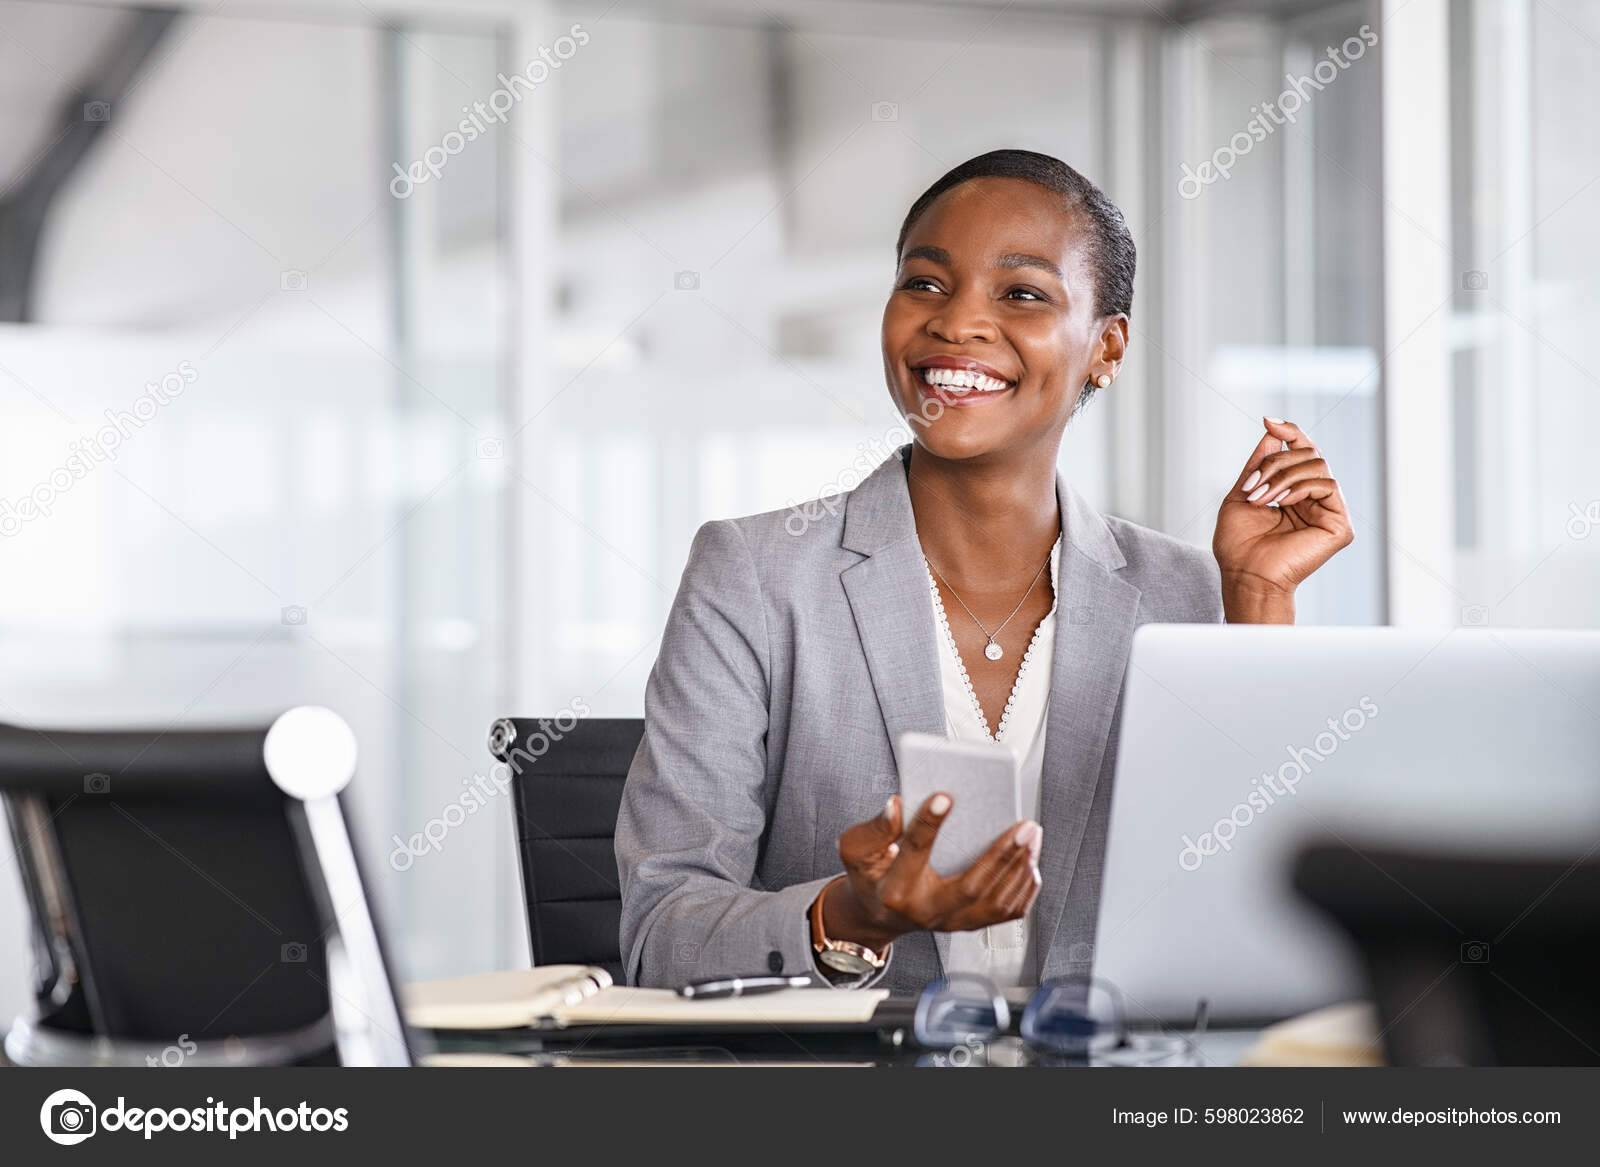 African Black Business Woman Using Smartphone While Working Laptop